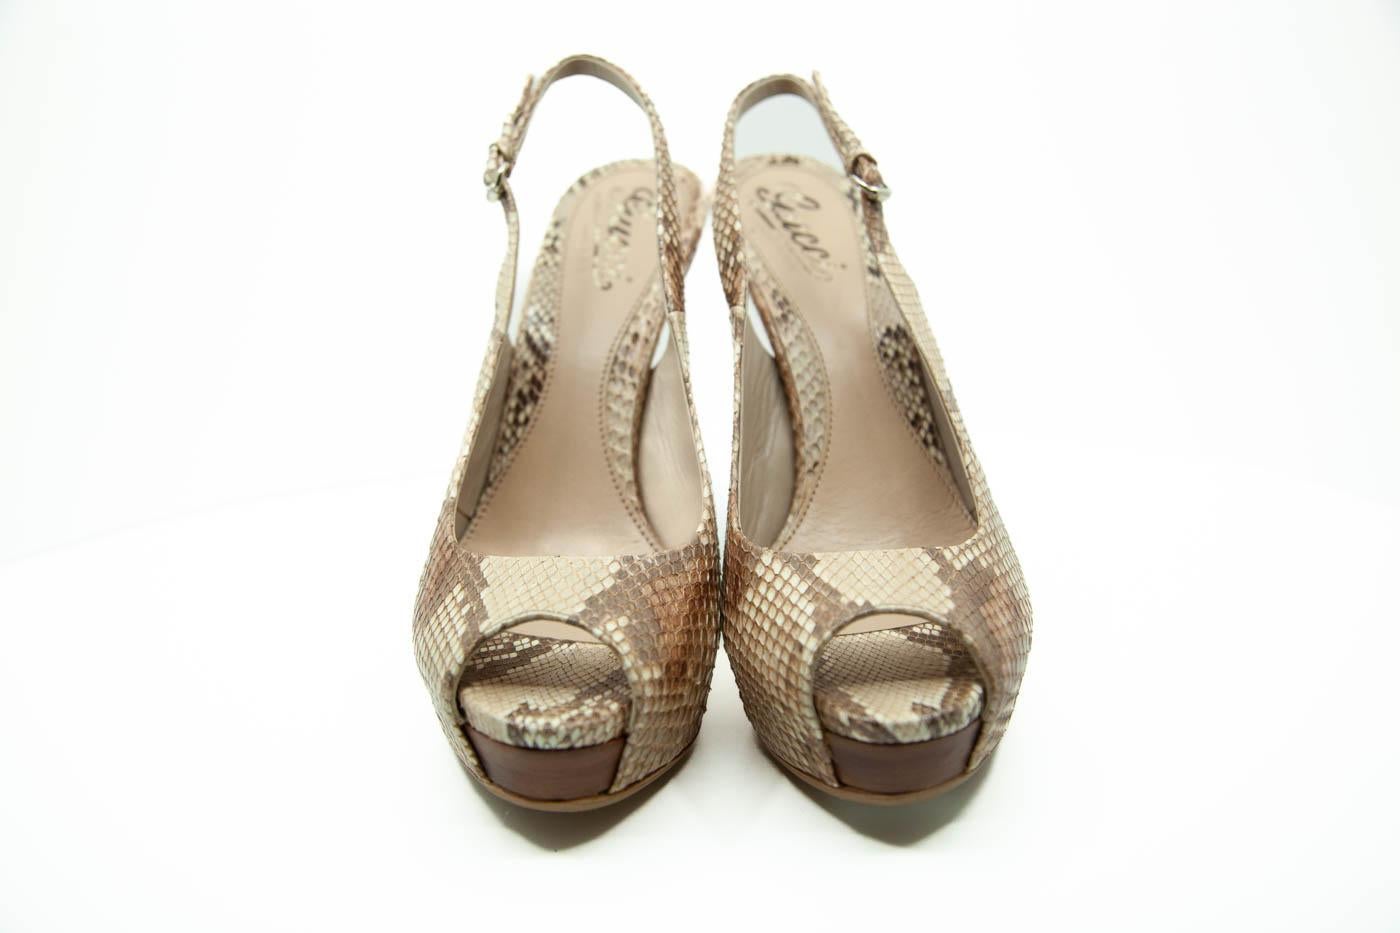 Gucci nude and brown python skin platform pumps, peep toes, platforms, leather insoles, slingback straps with silver tone buckle closures and 5.5